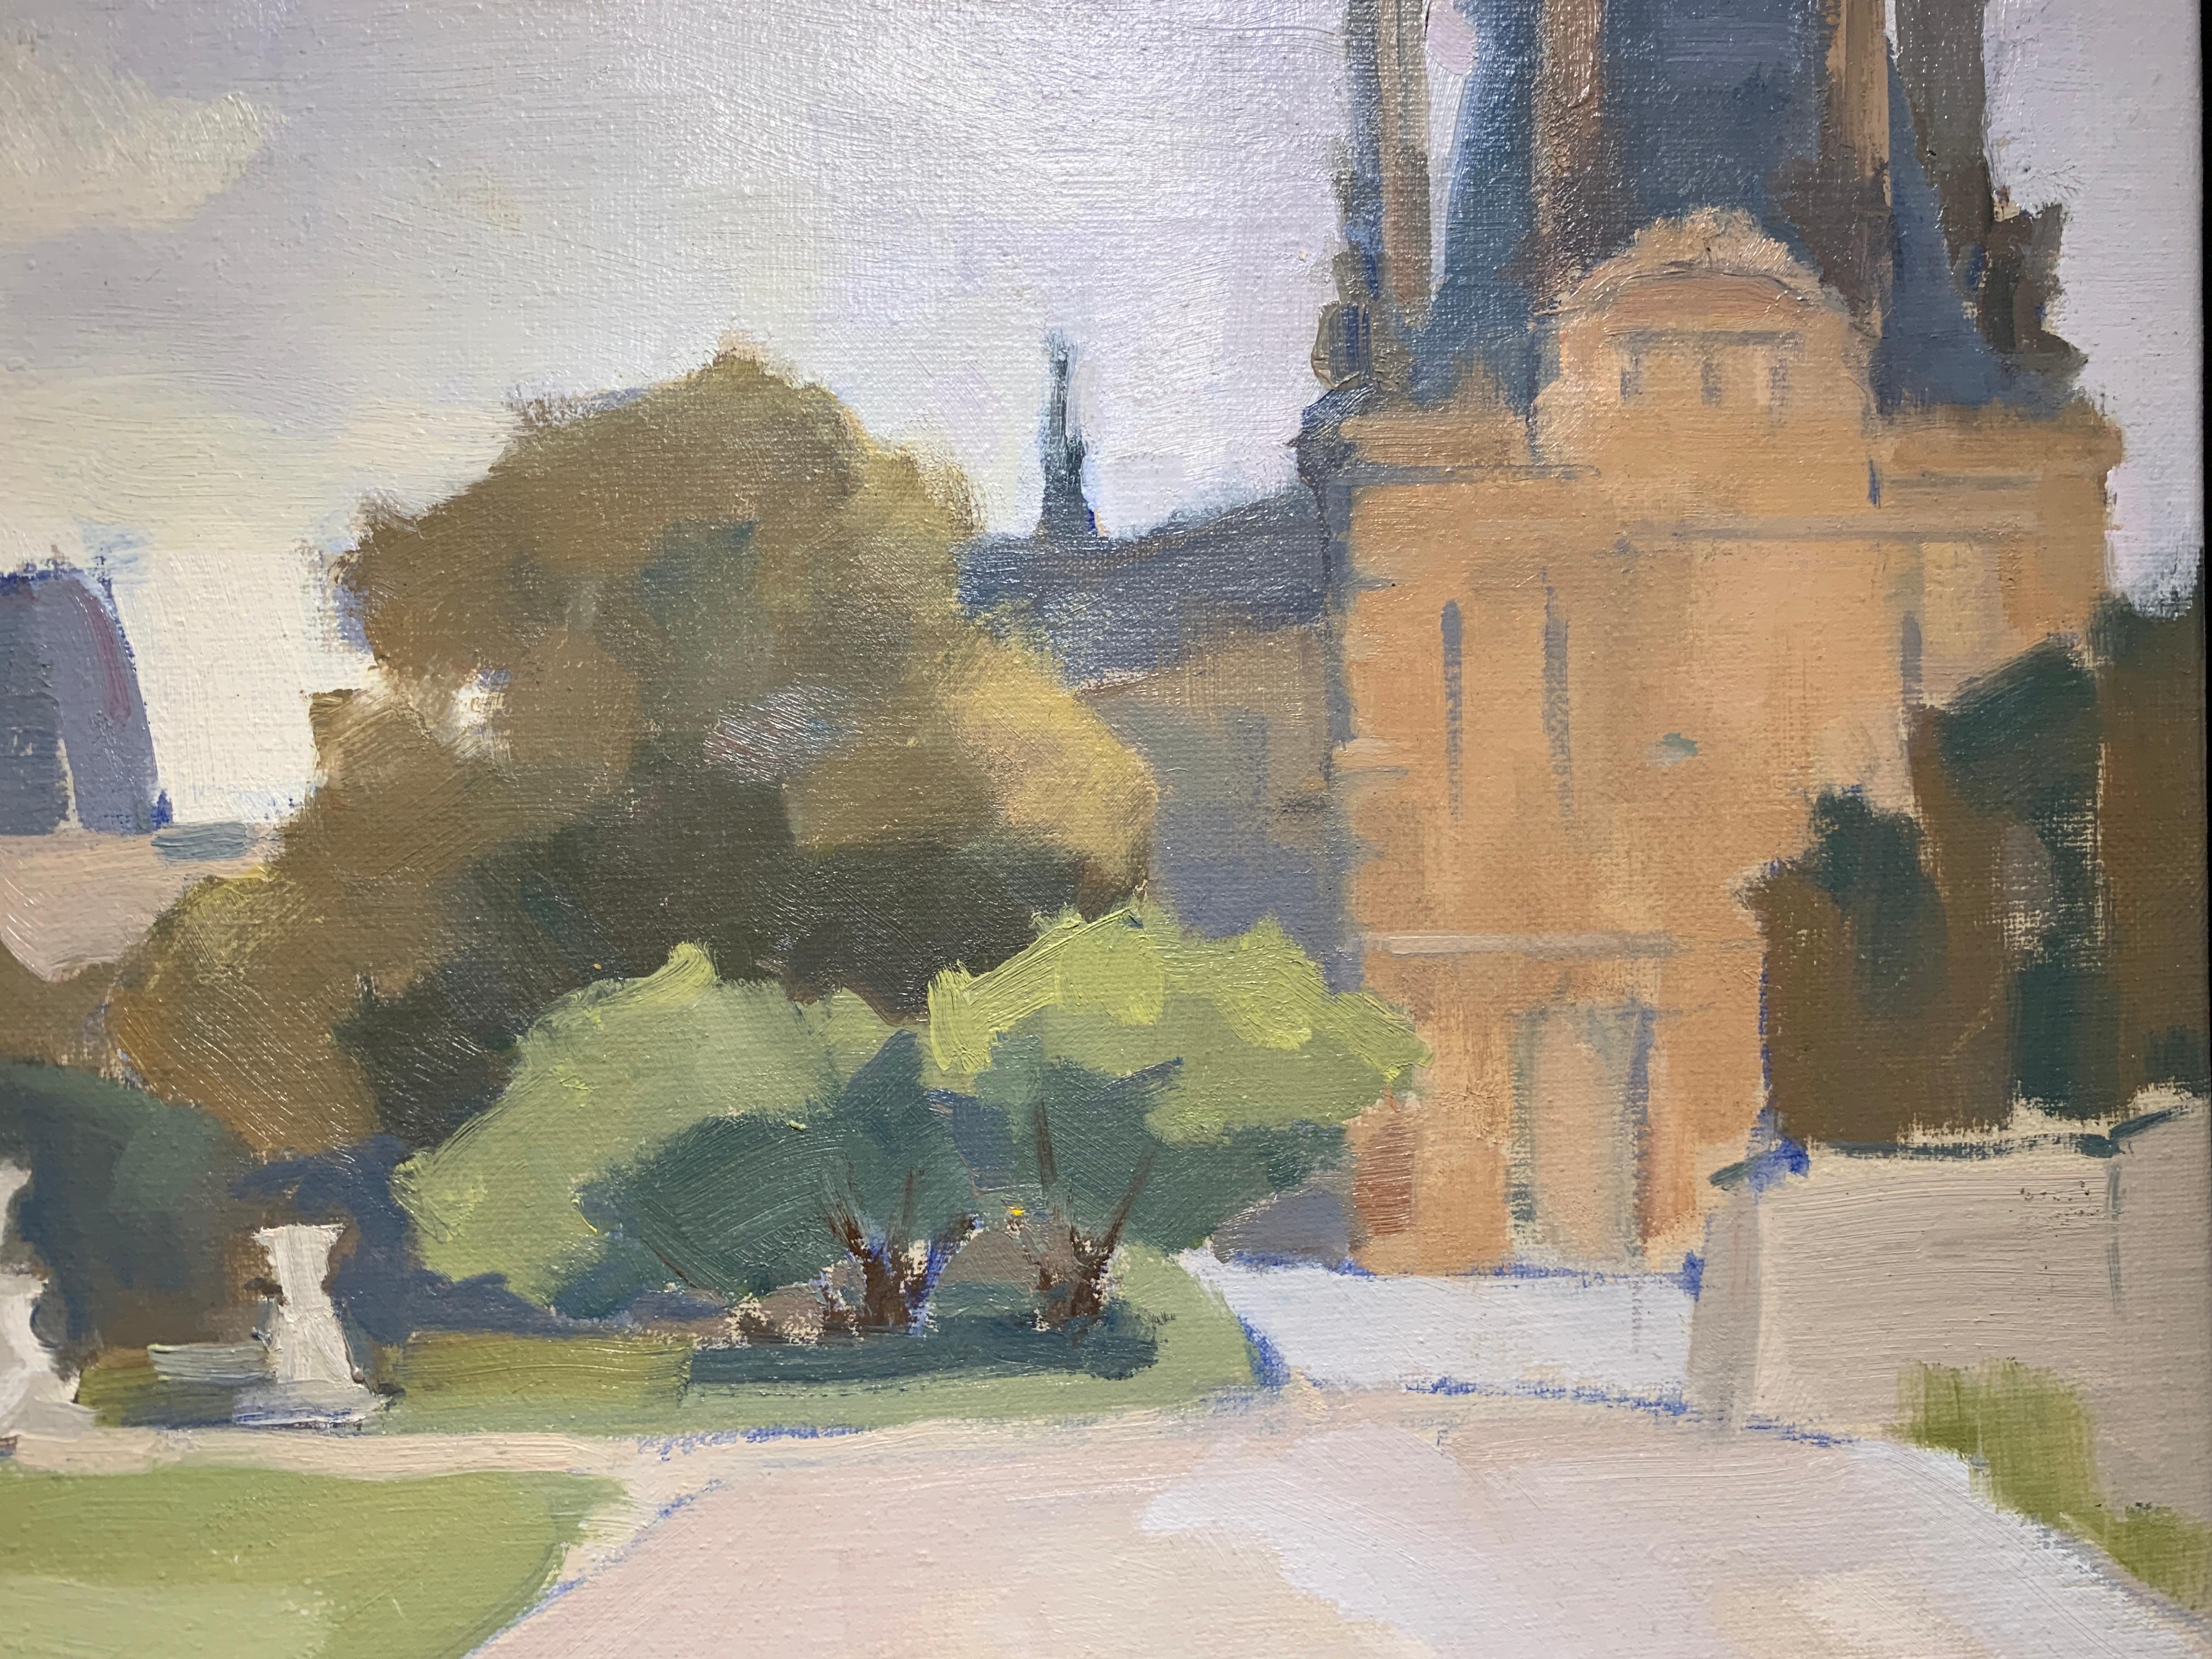 Louvre, from the Tuileries Lesley Powell Framed Oil on Linen Landscape Painting 2